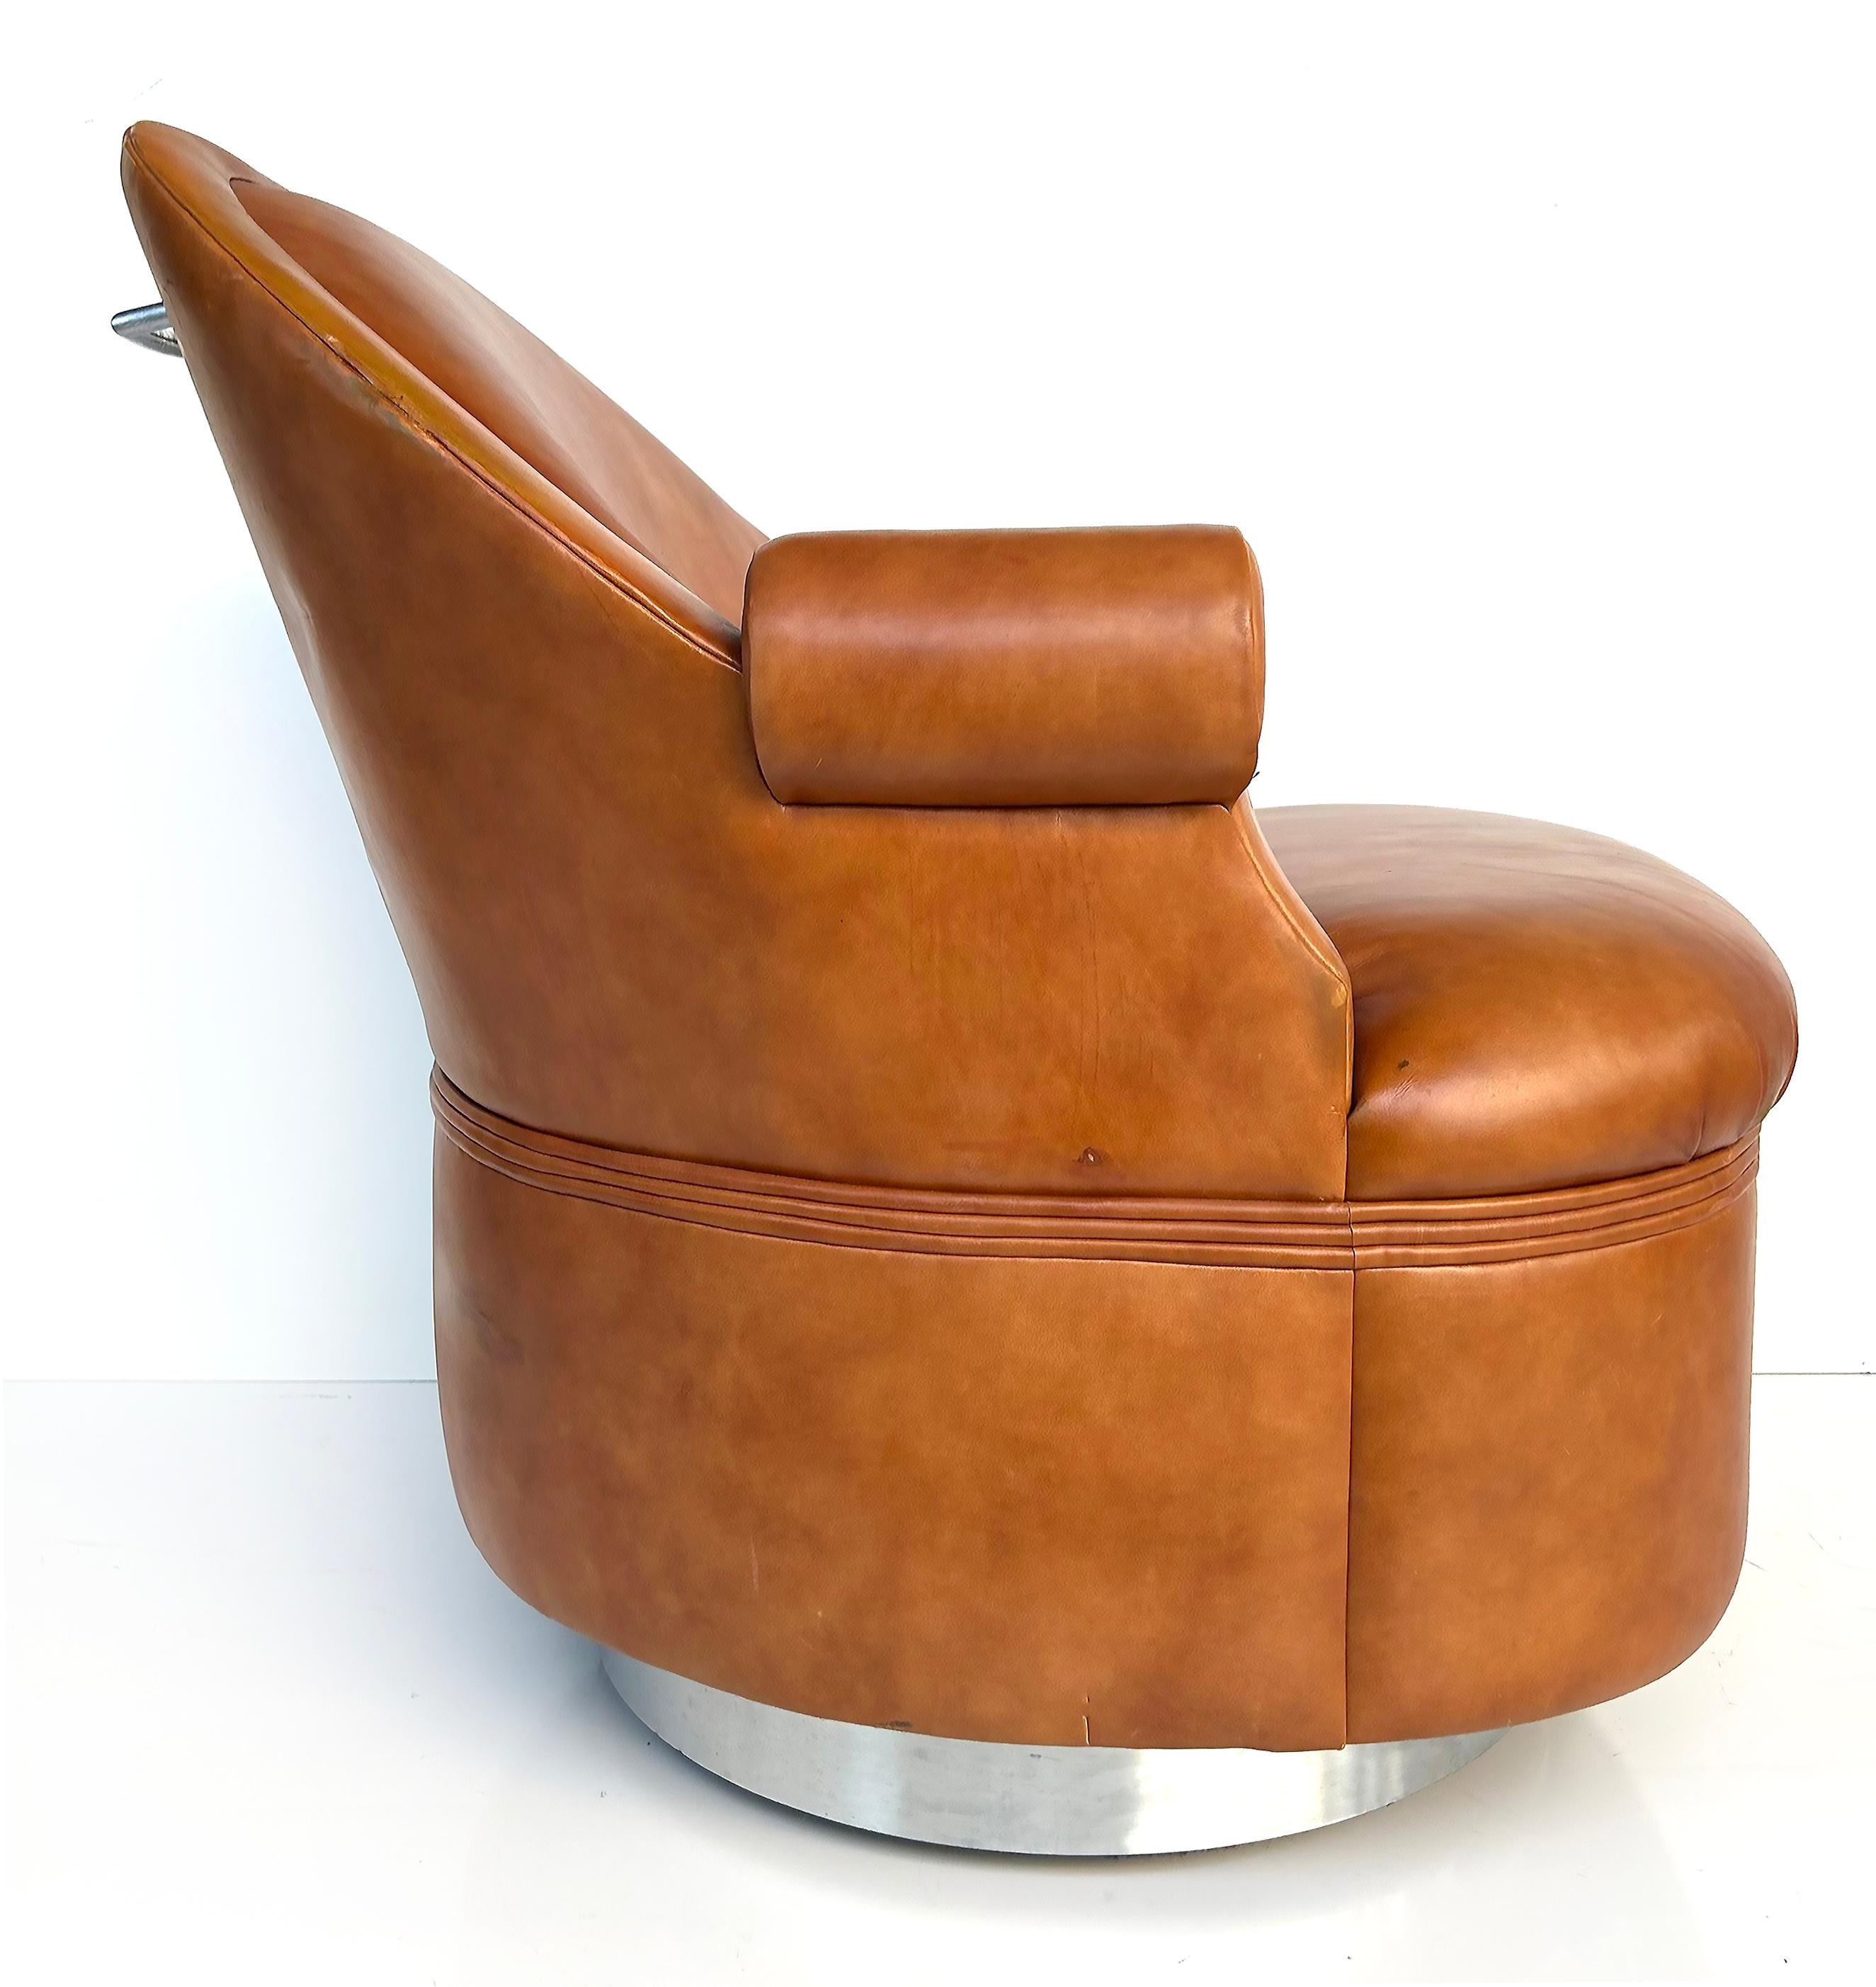  Steve Chase Martin Brattrud Chrome Leather Swivel Chairs on Casters- A Pair In Good Condition For Sale In Miami, FL